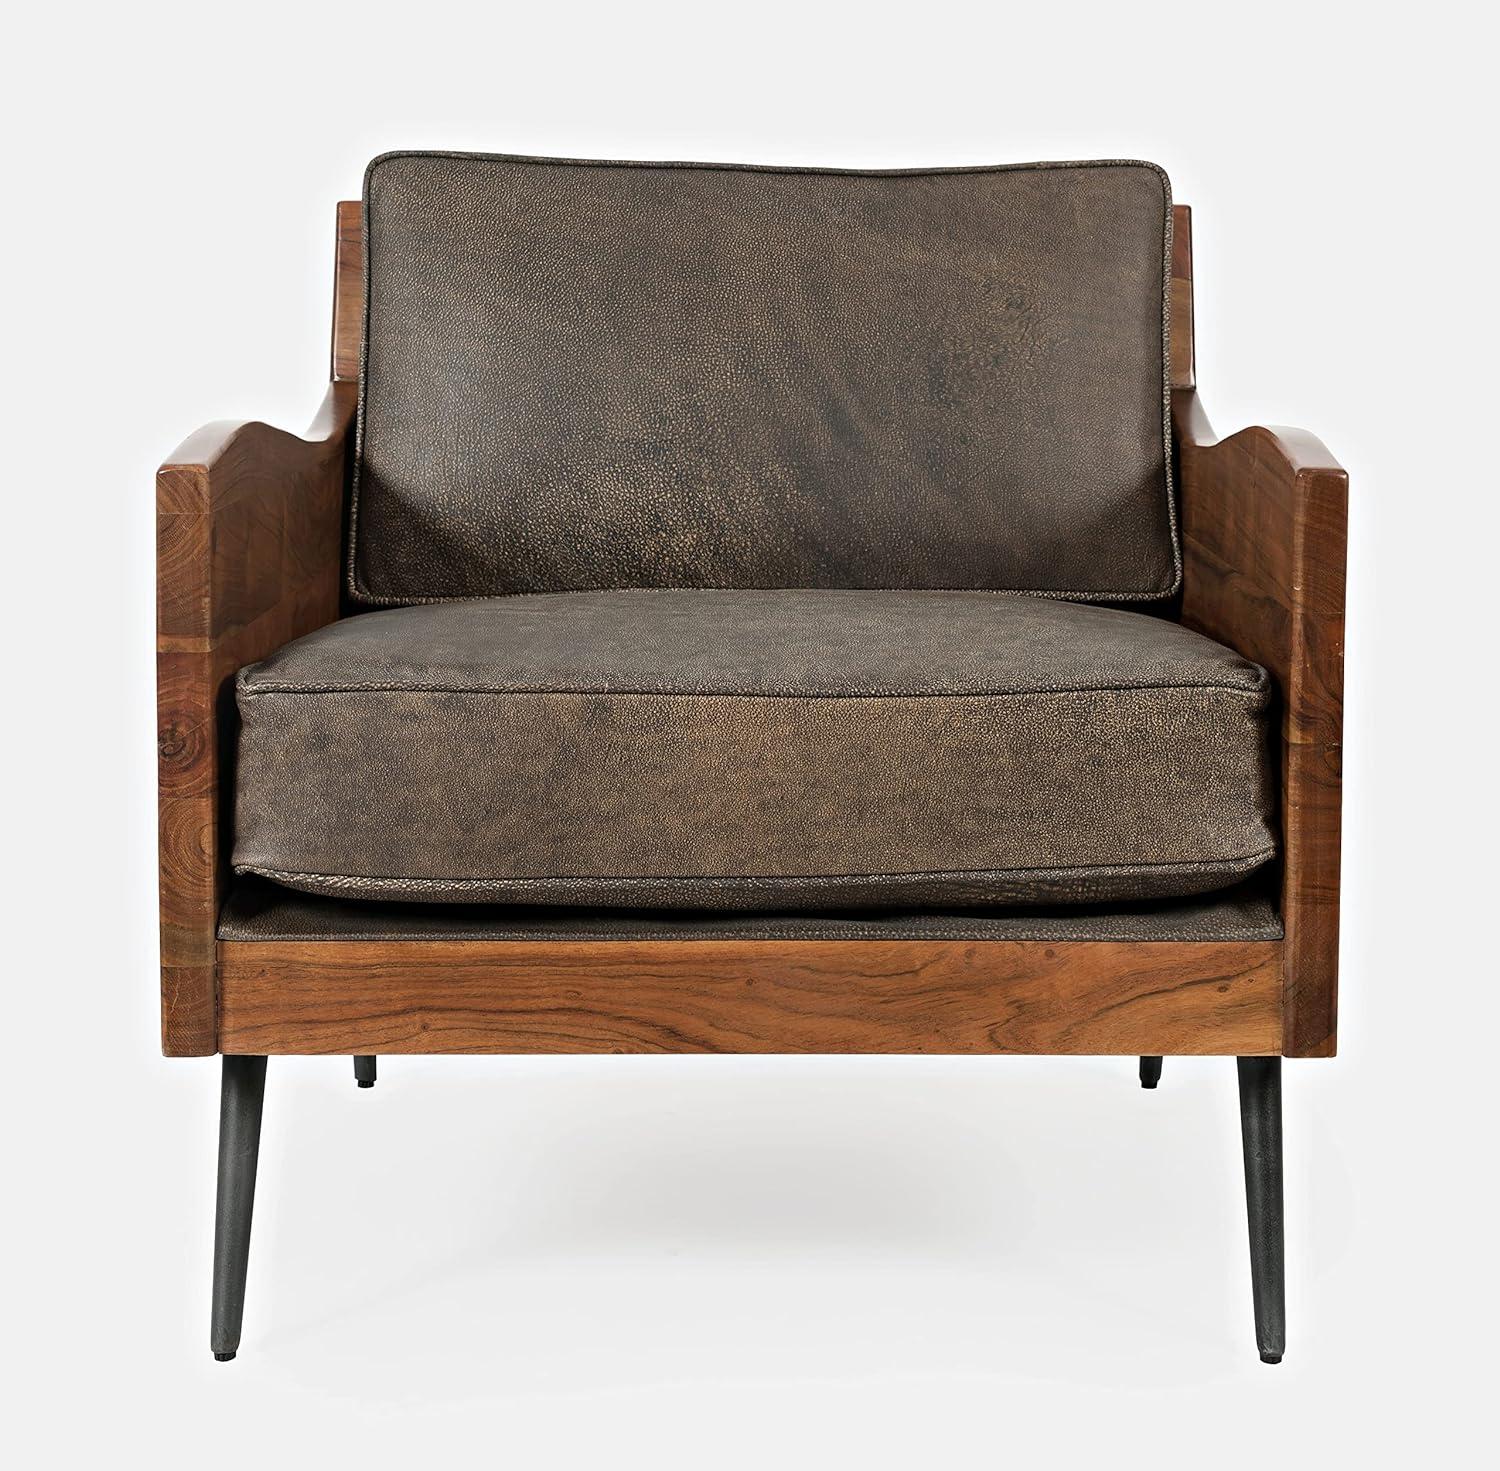 Bourbon Brown Genuine Leather & Acacia Wood Handcrafted Accent Chair